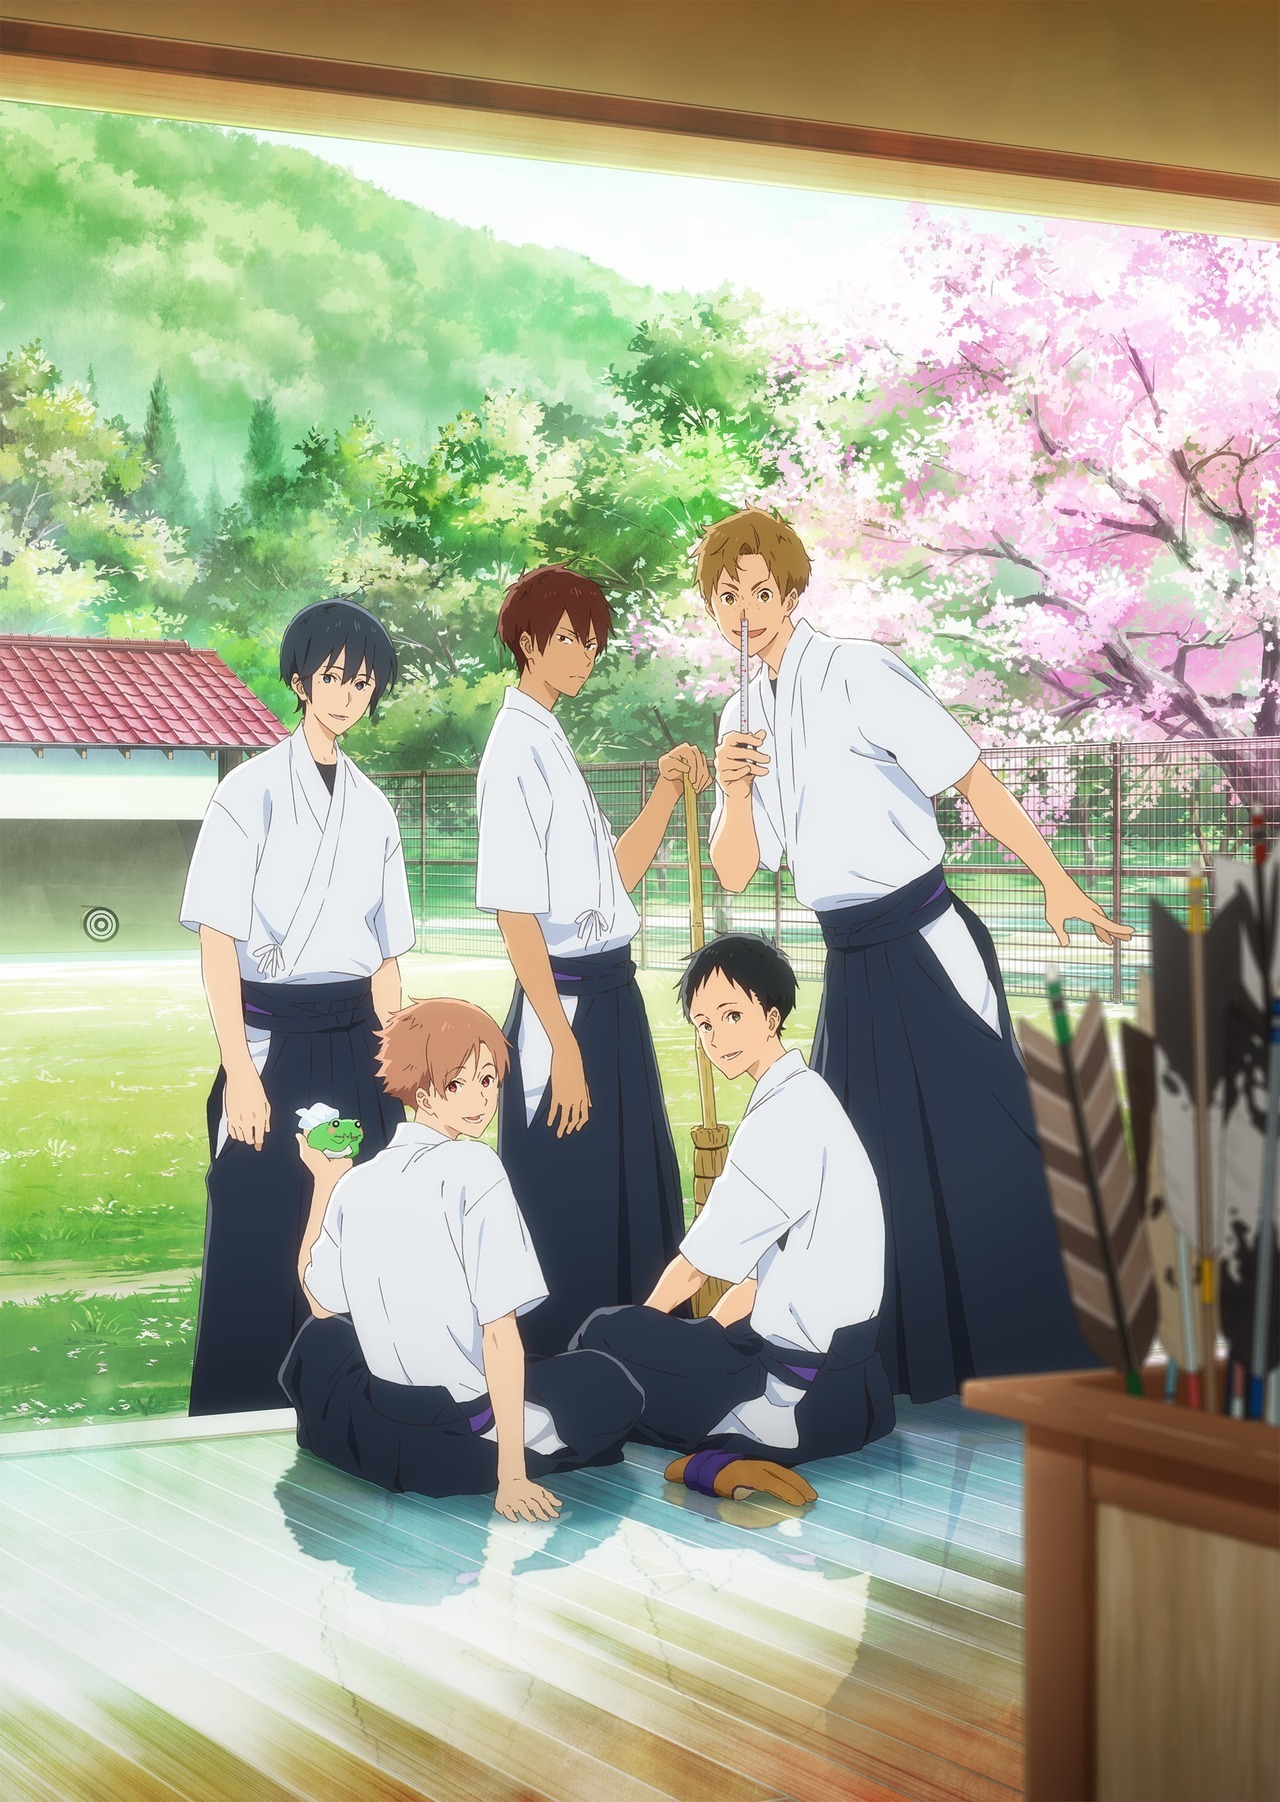 An unaired 14th episode of the anime âTsurune: Kazemai Koukou Kyuudou-buâ will have a pre-screening event scheduled for March 3rd, 2019.